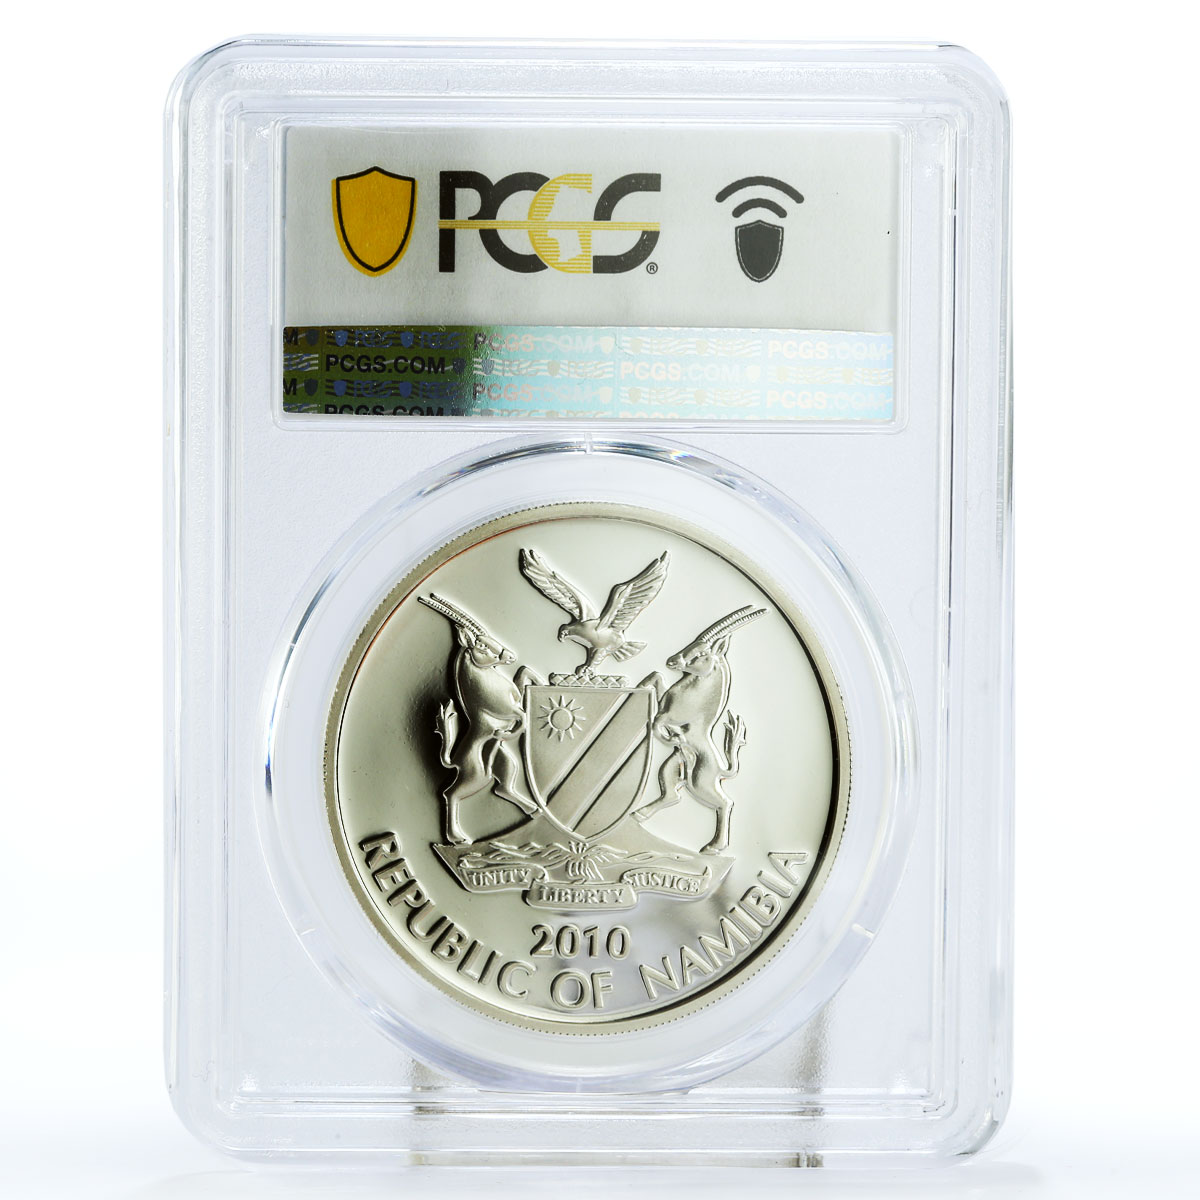 Namibia 20 dollars 20 Years Central Bank Eagle Bird PR70 PCGS silver coin 2010